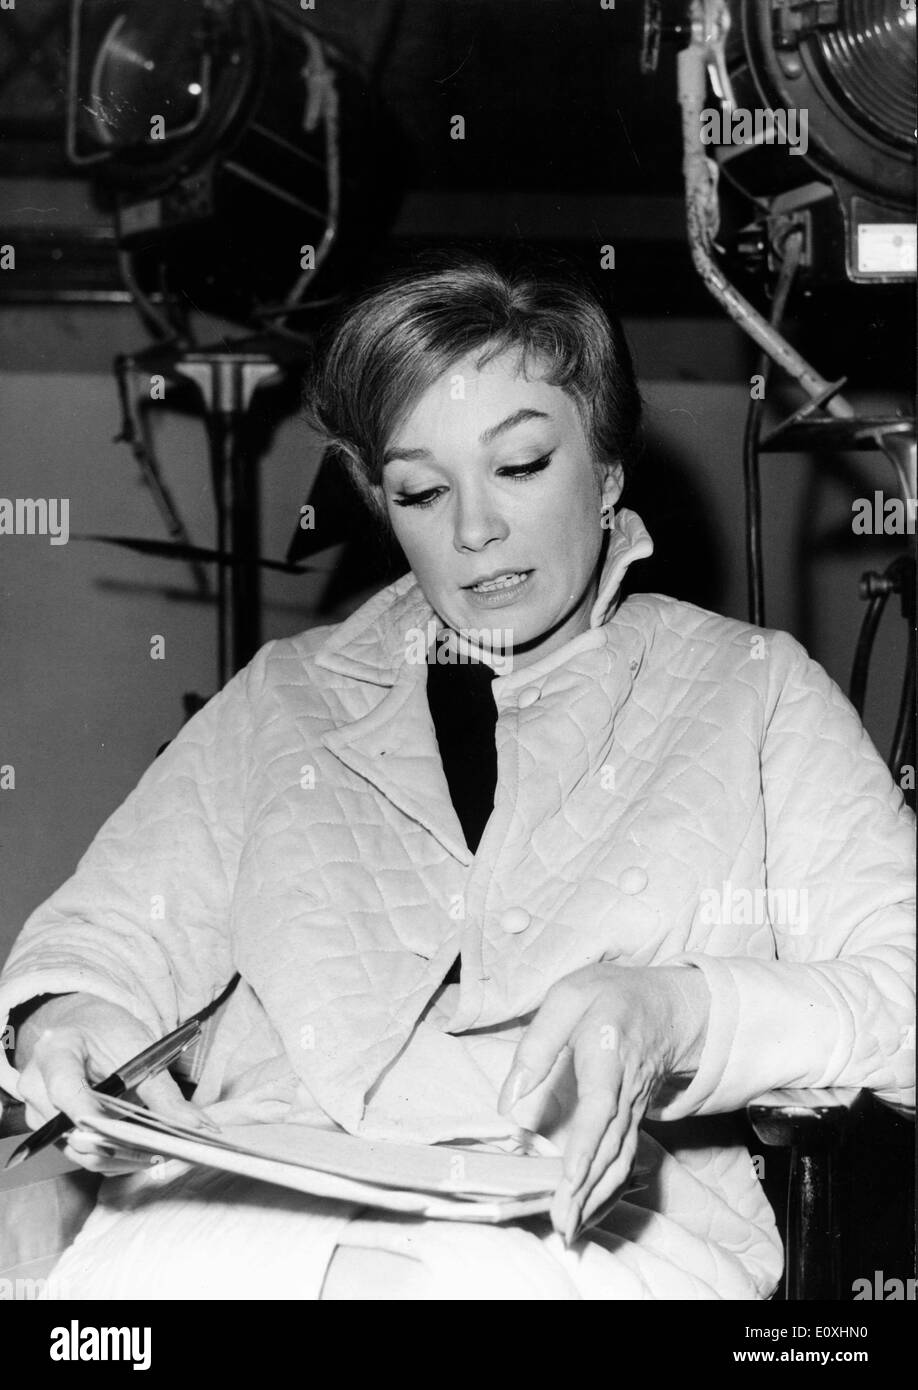 Actress Shirley MacLaine reading papers Stock Photo